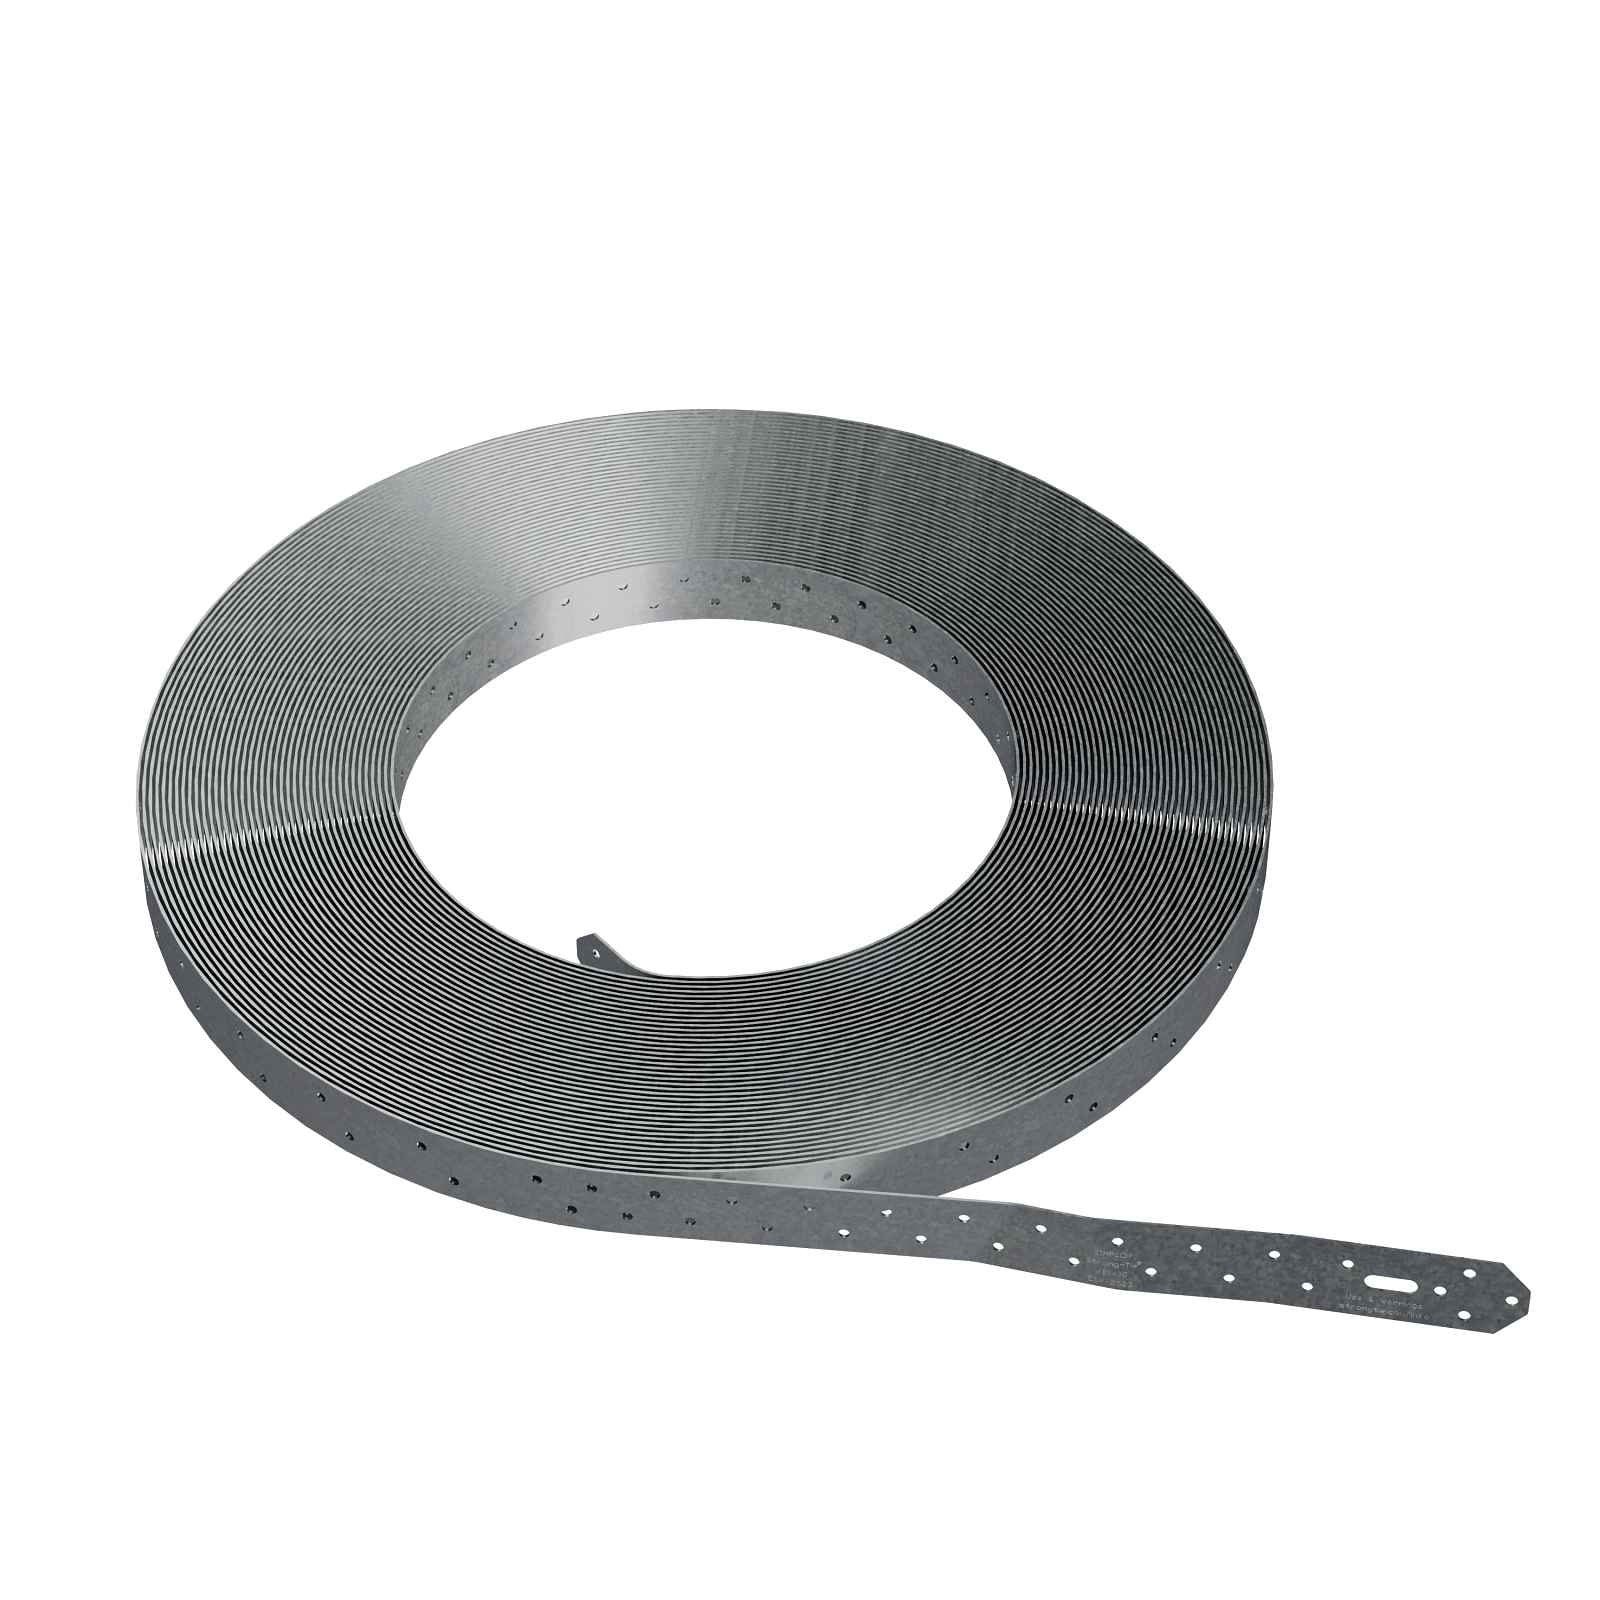 Simpson WB143C Coiled Wall Bracing - G90 Galvanized